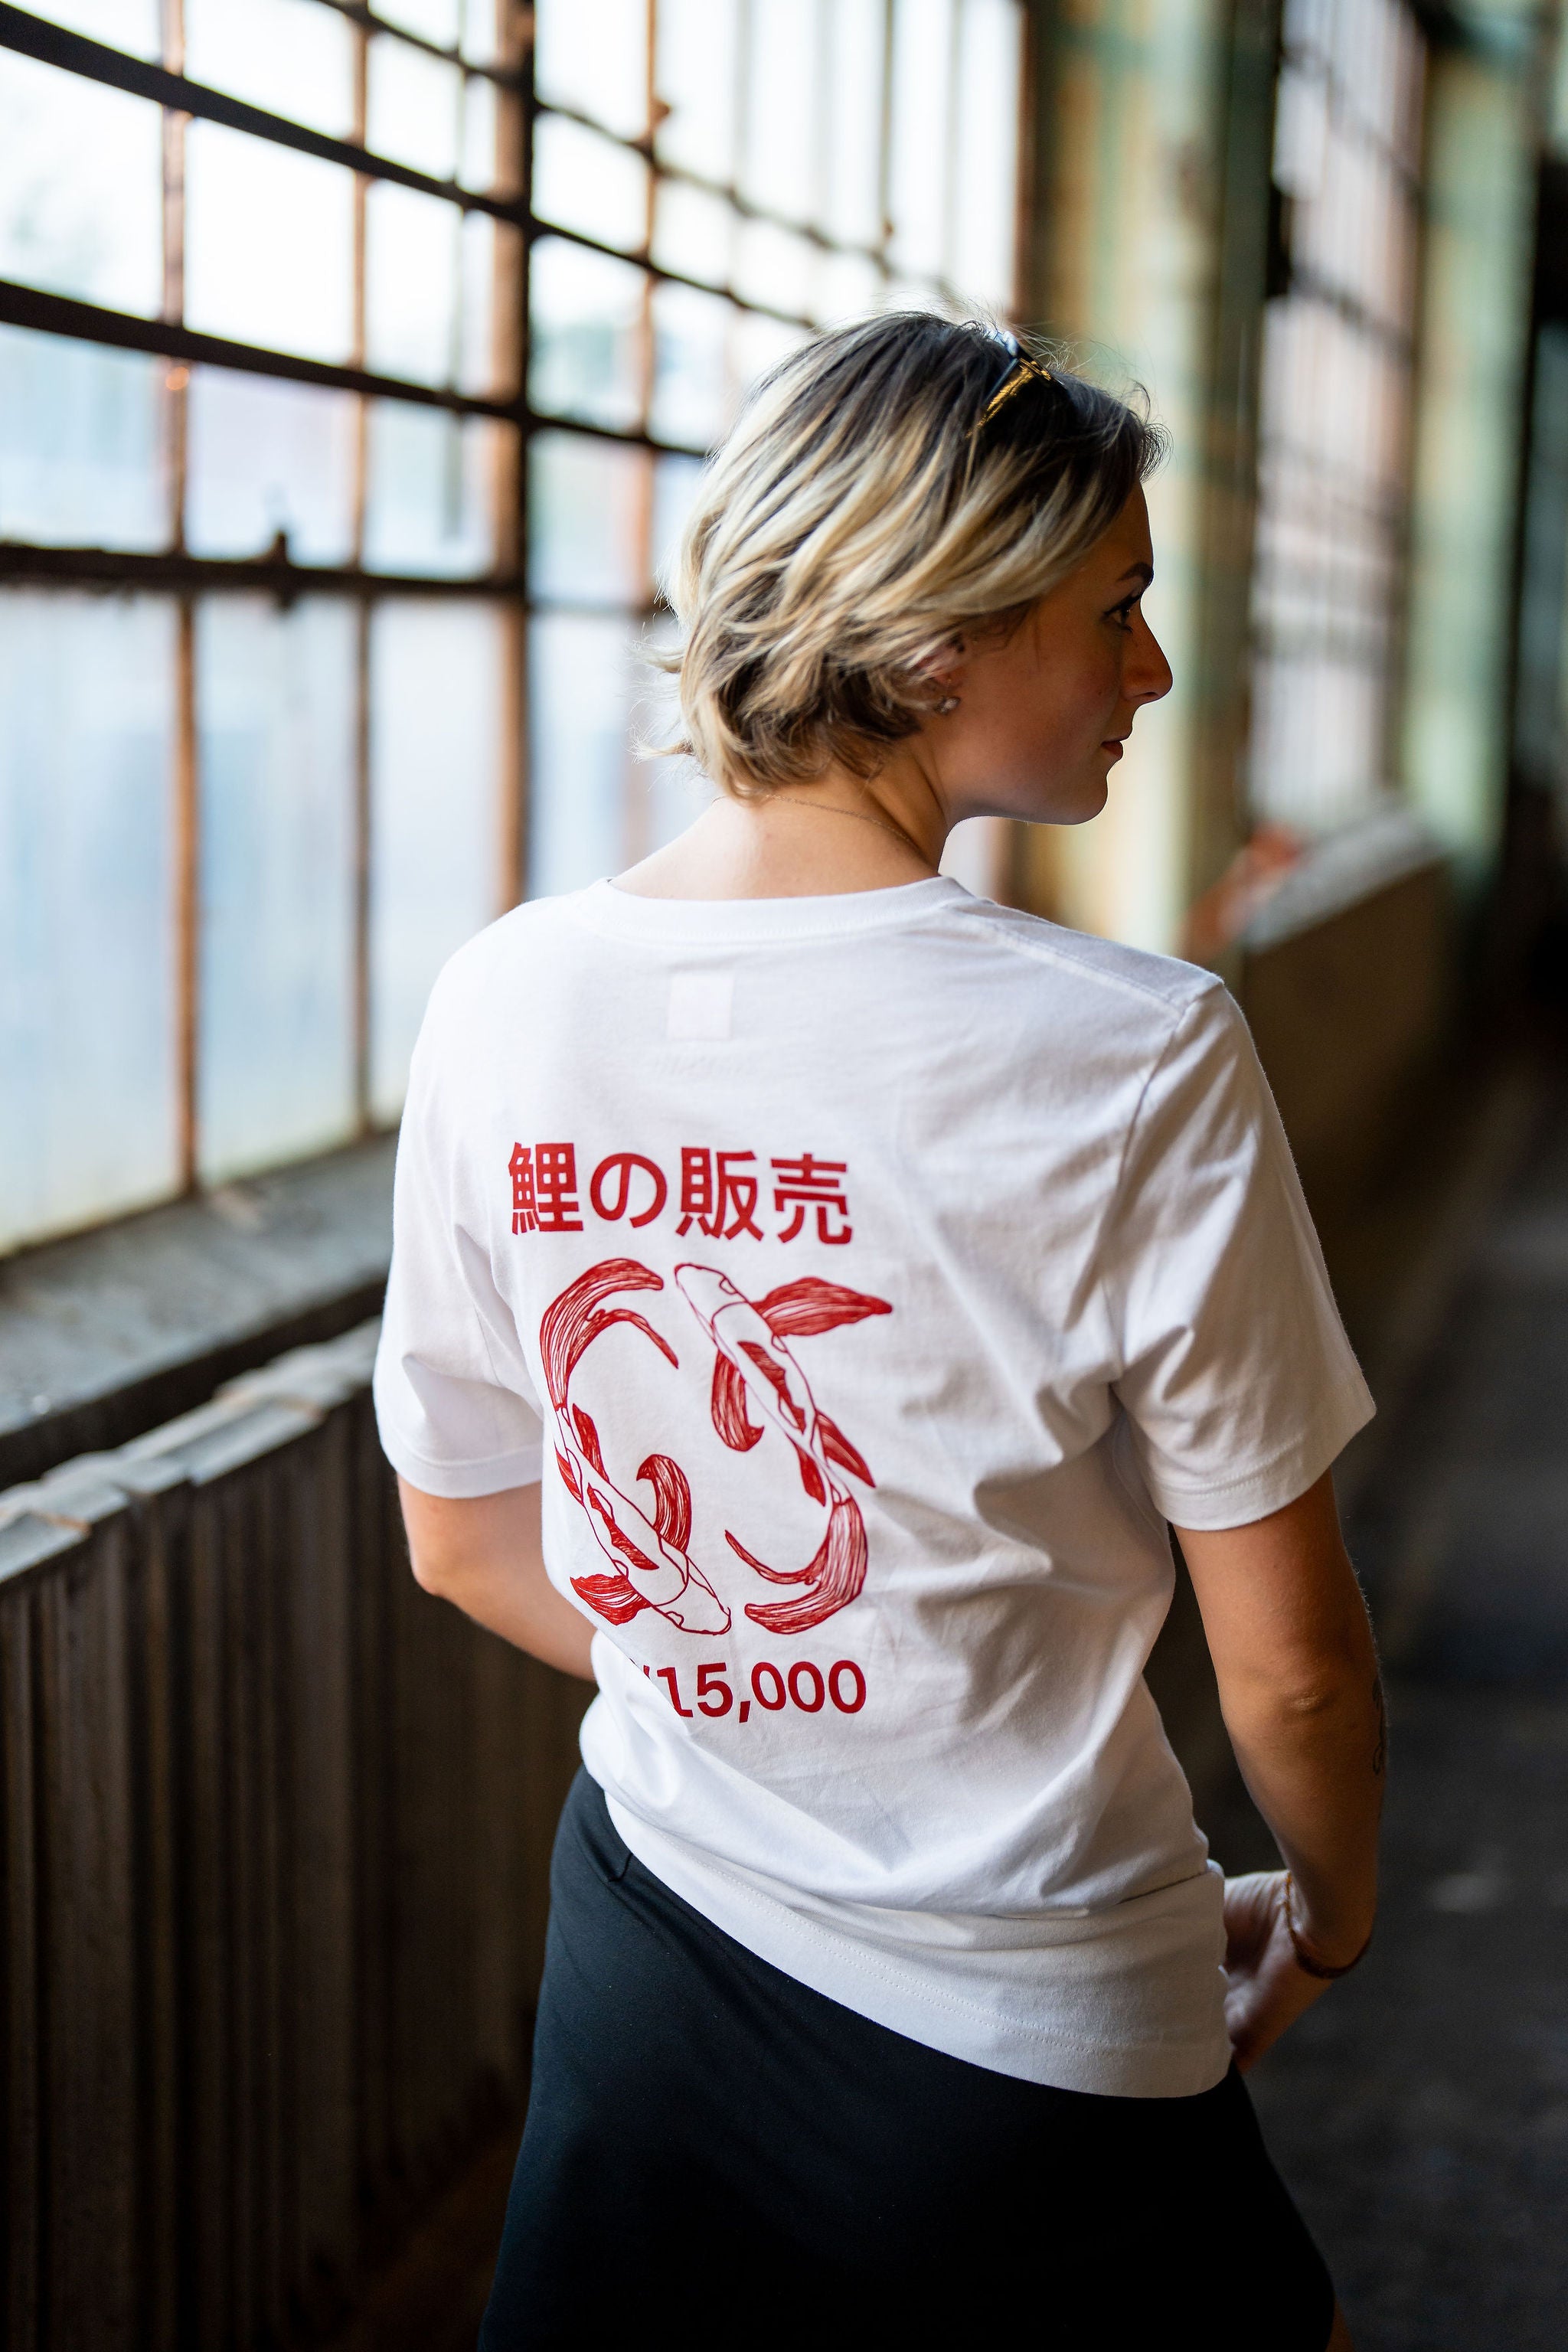 Woman wearing white streetwear shirt with a koi fish design in red on the back